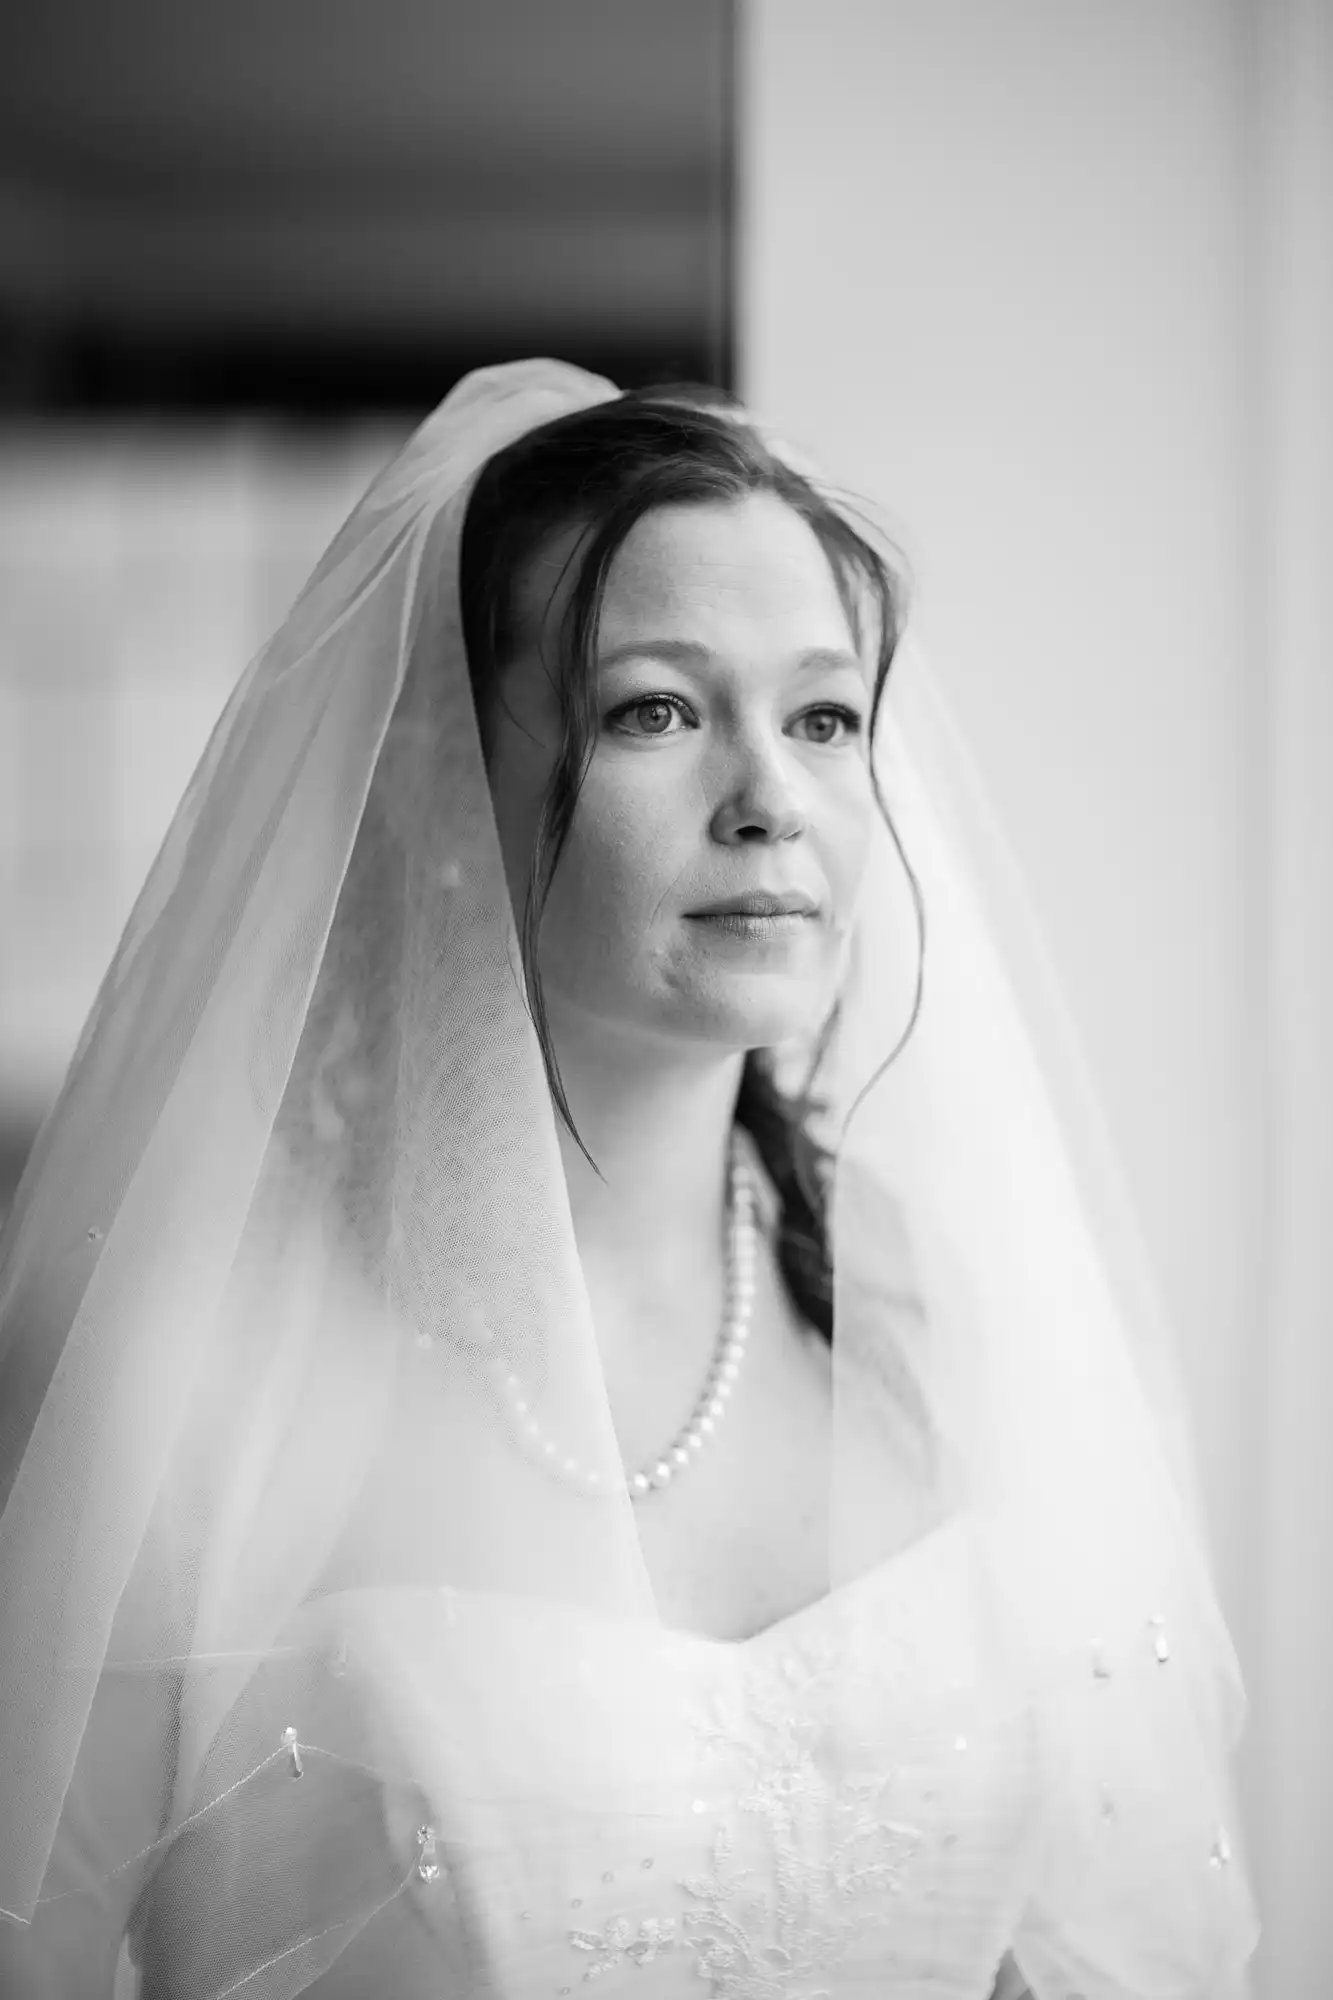 A bride in a white gown and veil, with pearls, looks pensively out a window in a softly lit black and white photograph.